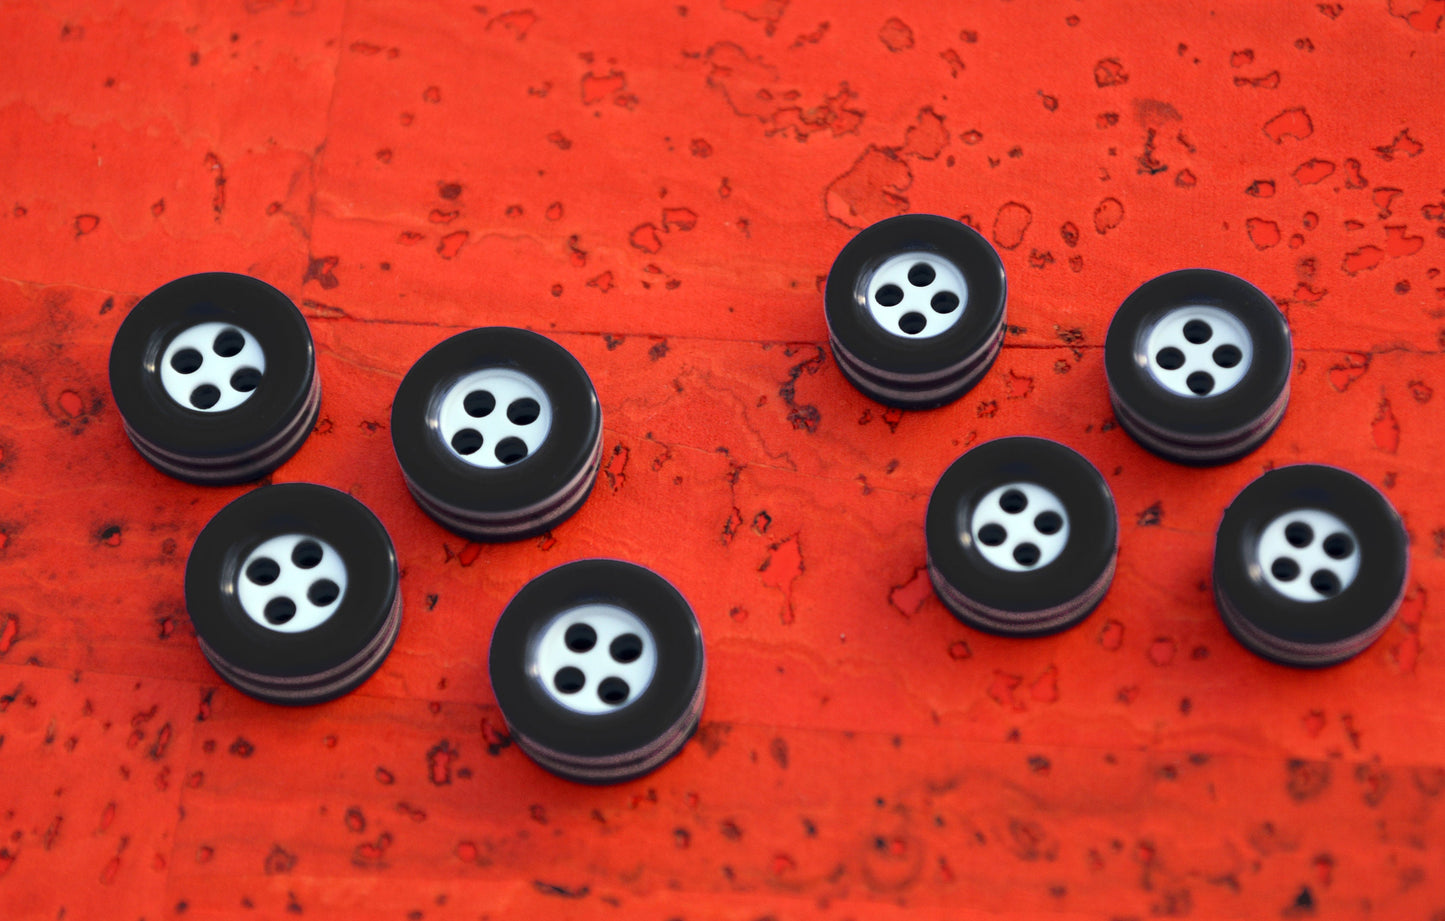 14 white and black STRIPED BUTTONS for 1 complete shirt - 5mm thick! - great quality - Made in ITALY